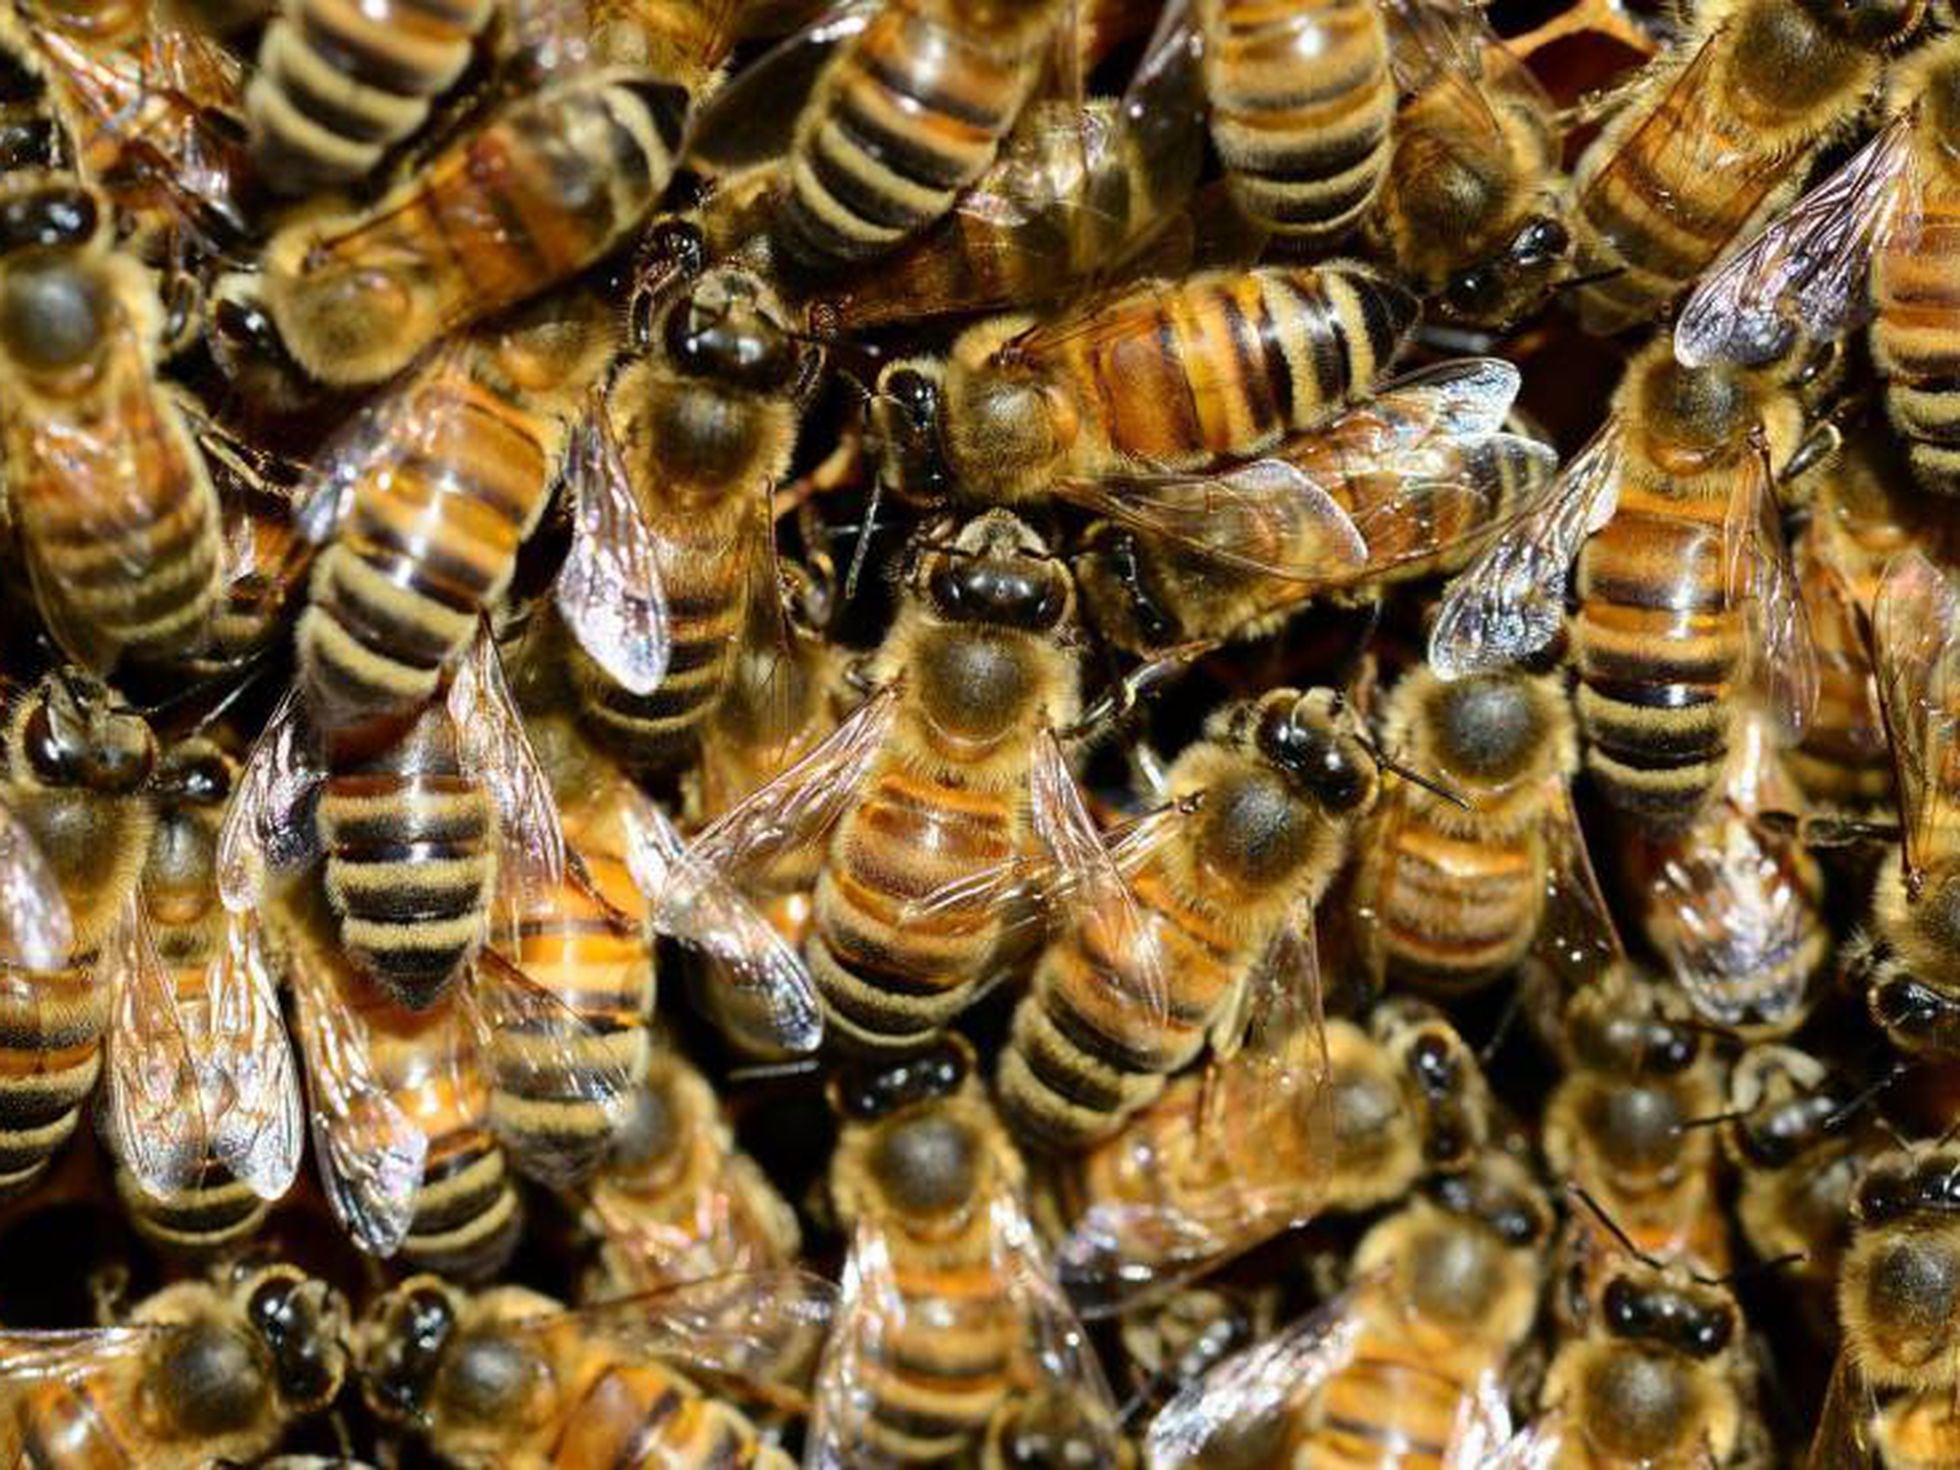 New Research Deepens Mystery About Evolution of Bees' Social Behavior